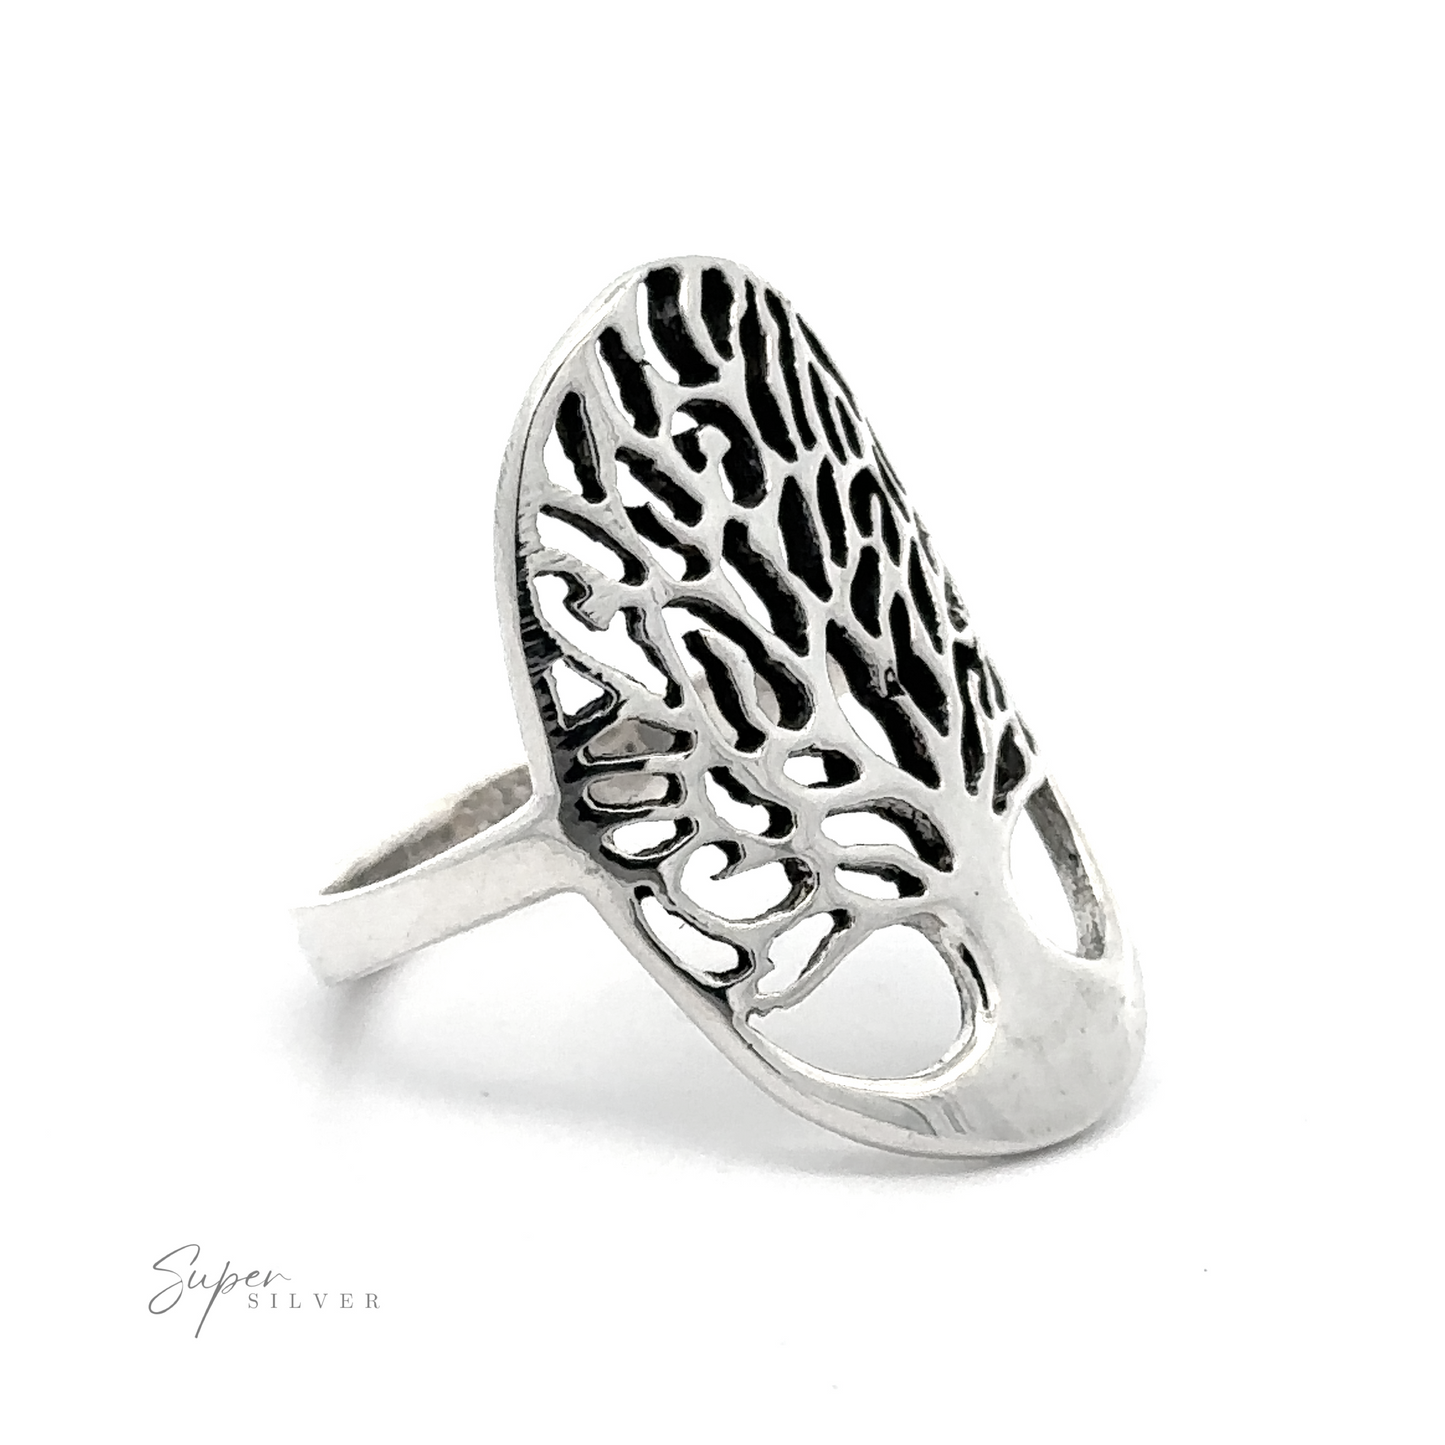 .925 Sterling Silver Oval Tree of Life ring with a filigree design.